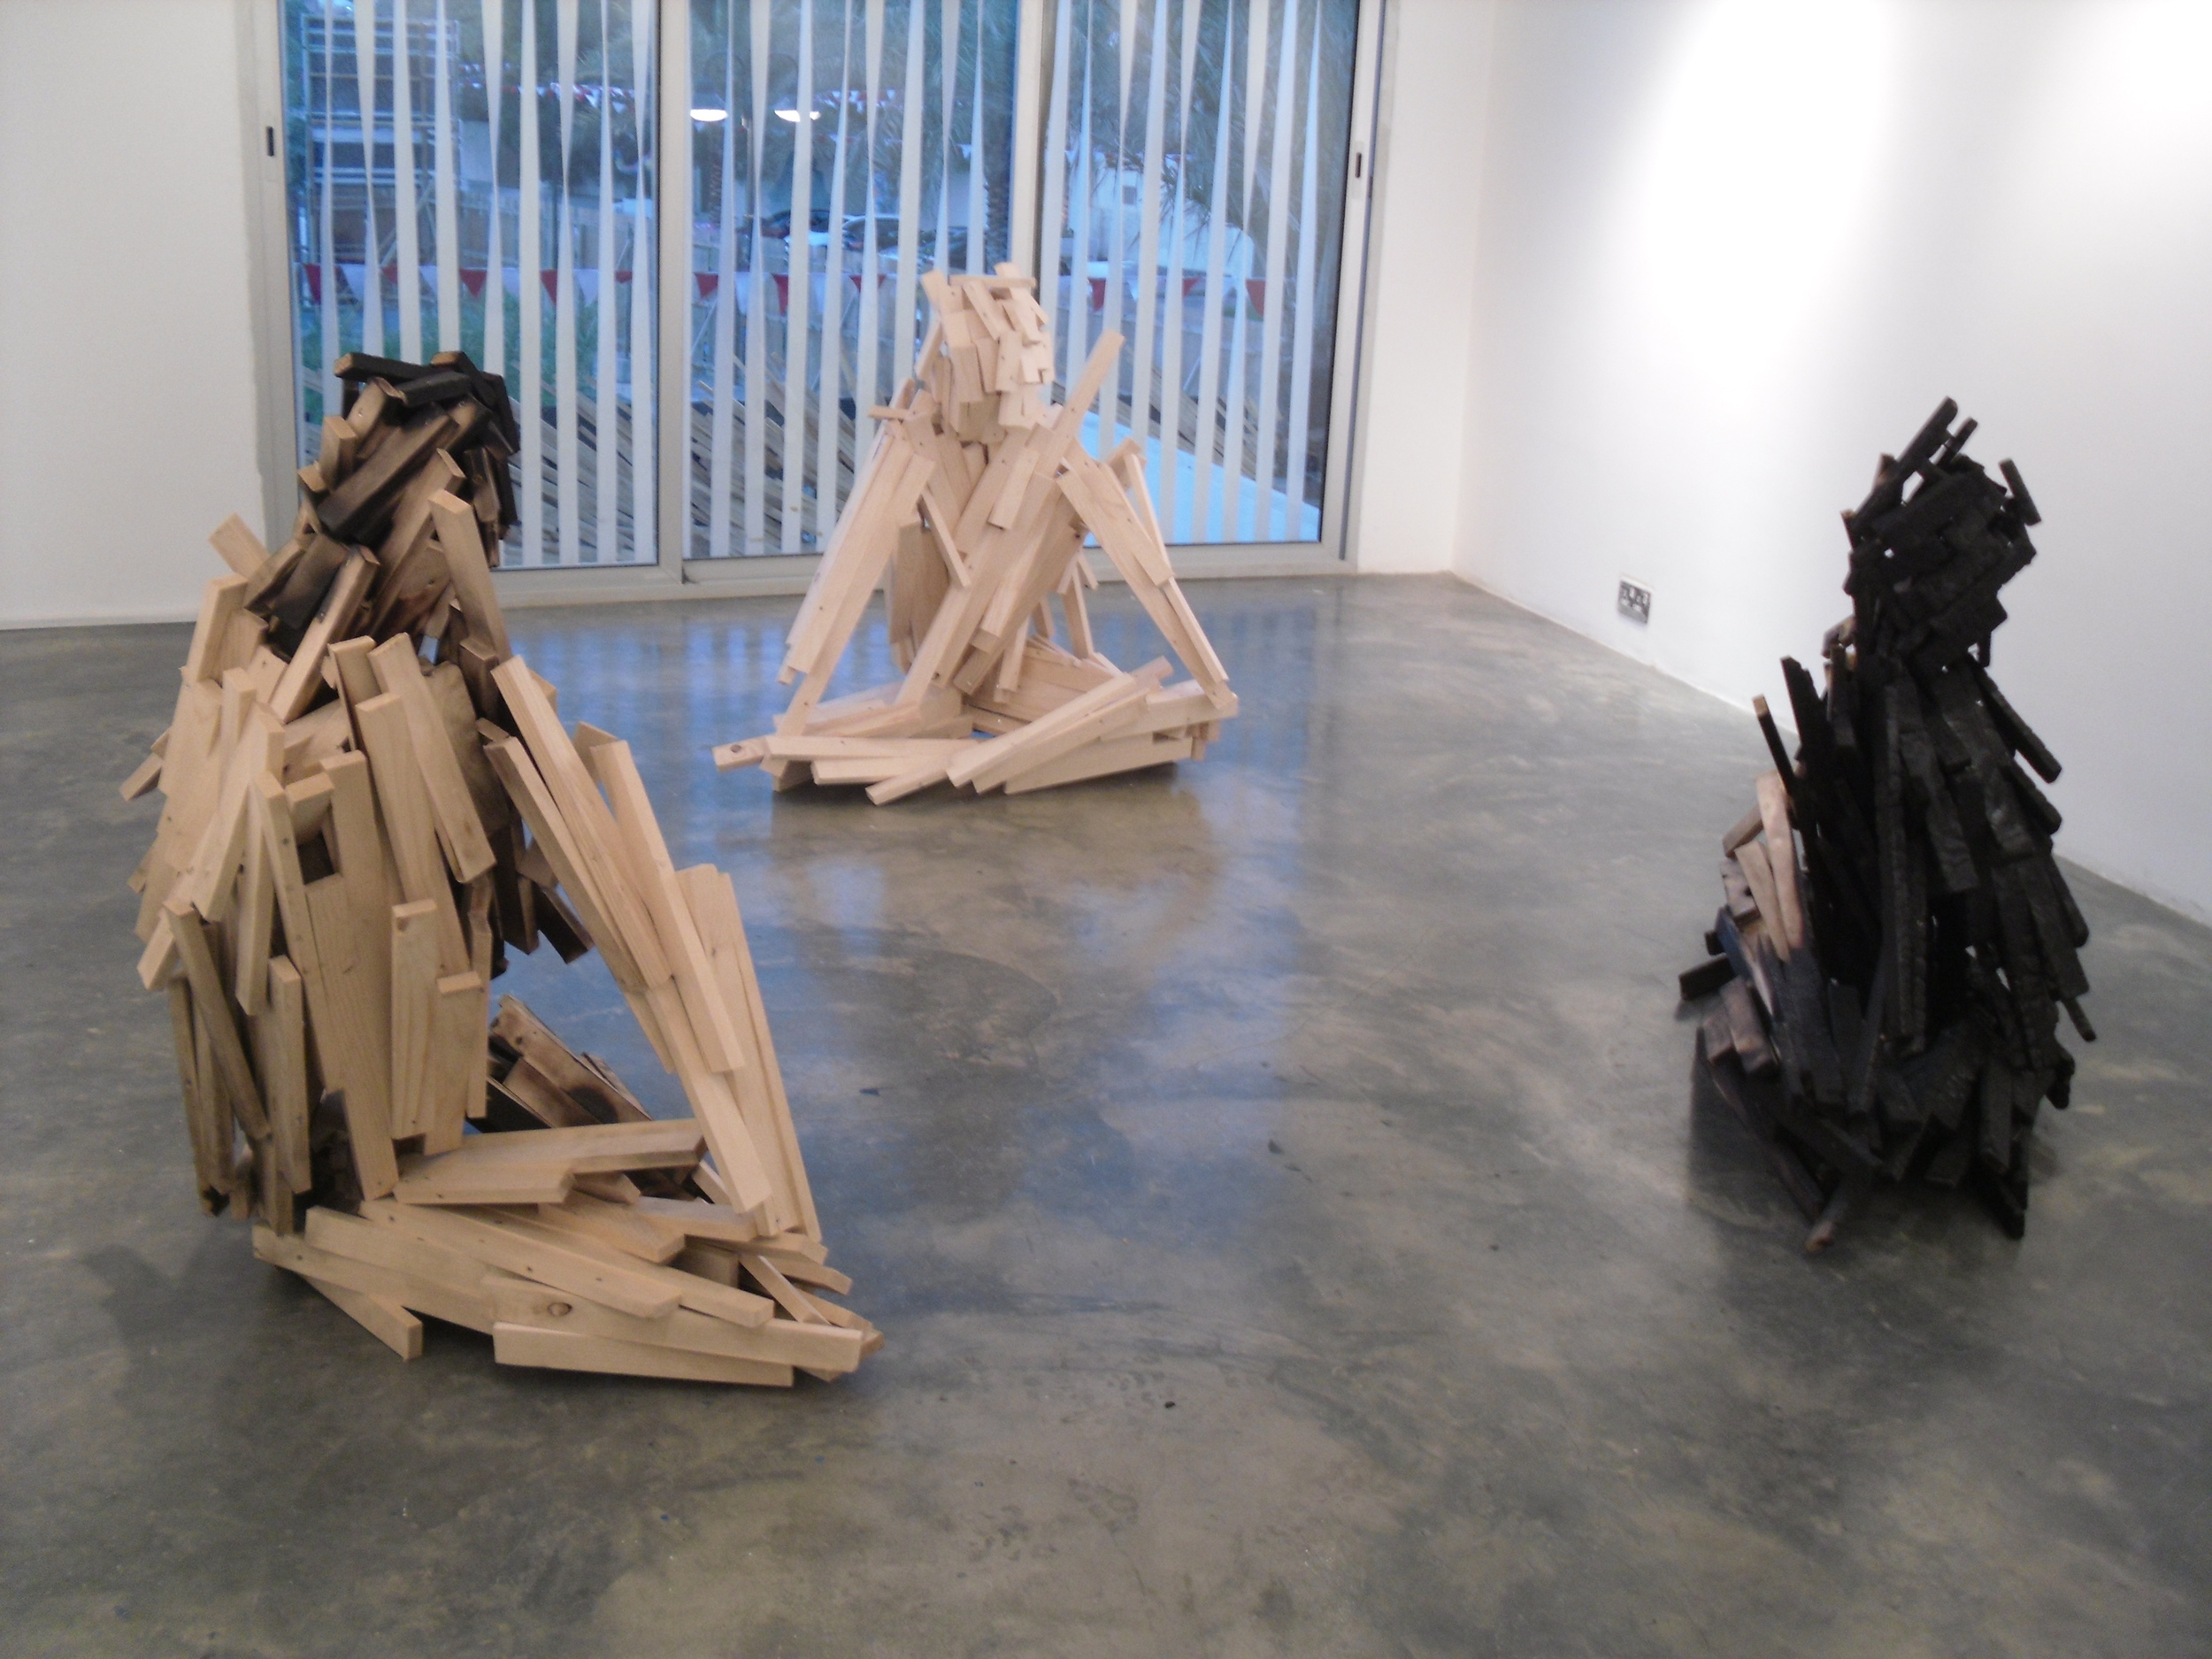 Exhibition view of Alan Goulbourne’s solo show at Al Riwaq Art Space: The Furies, 2012.